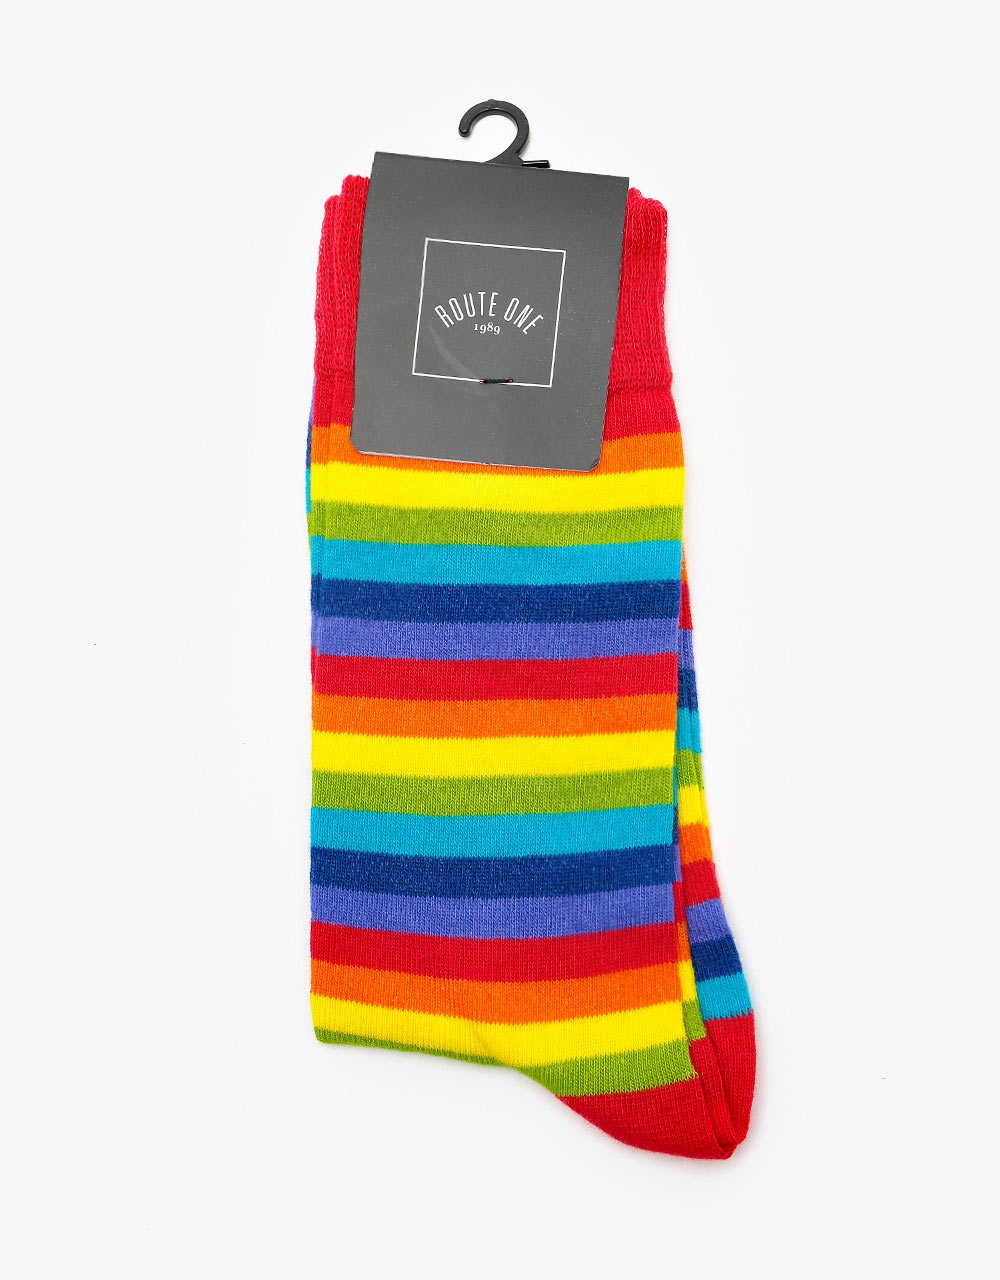 Route One Striped Socks - Rainbow